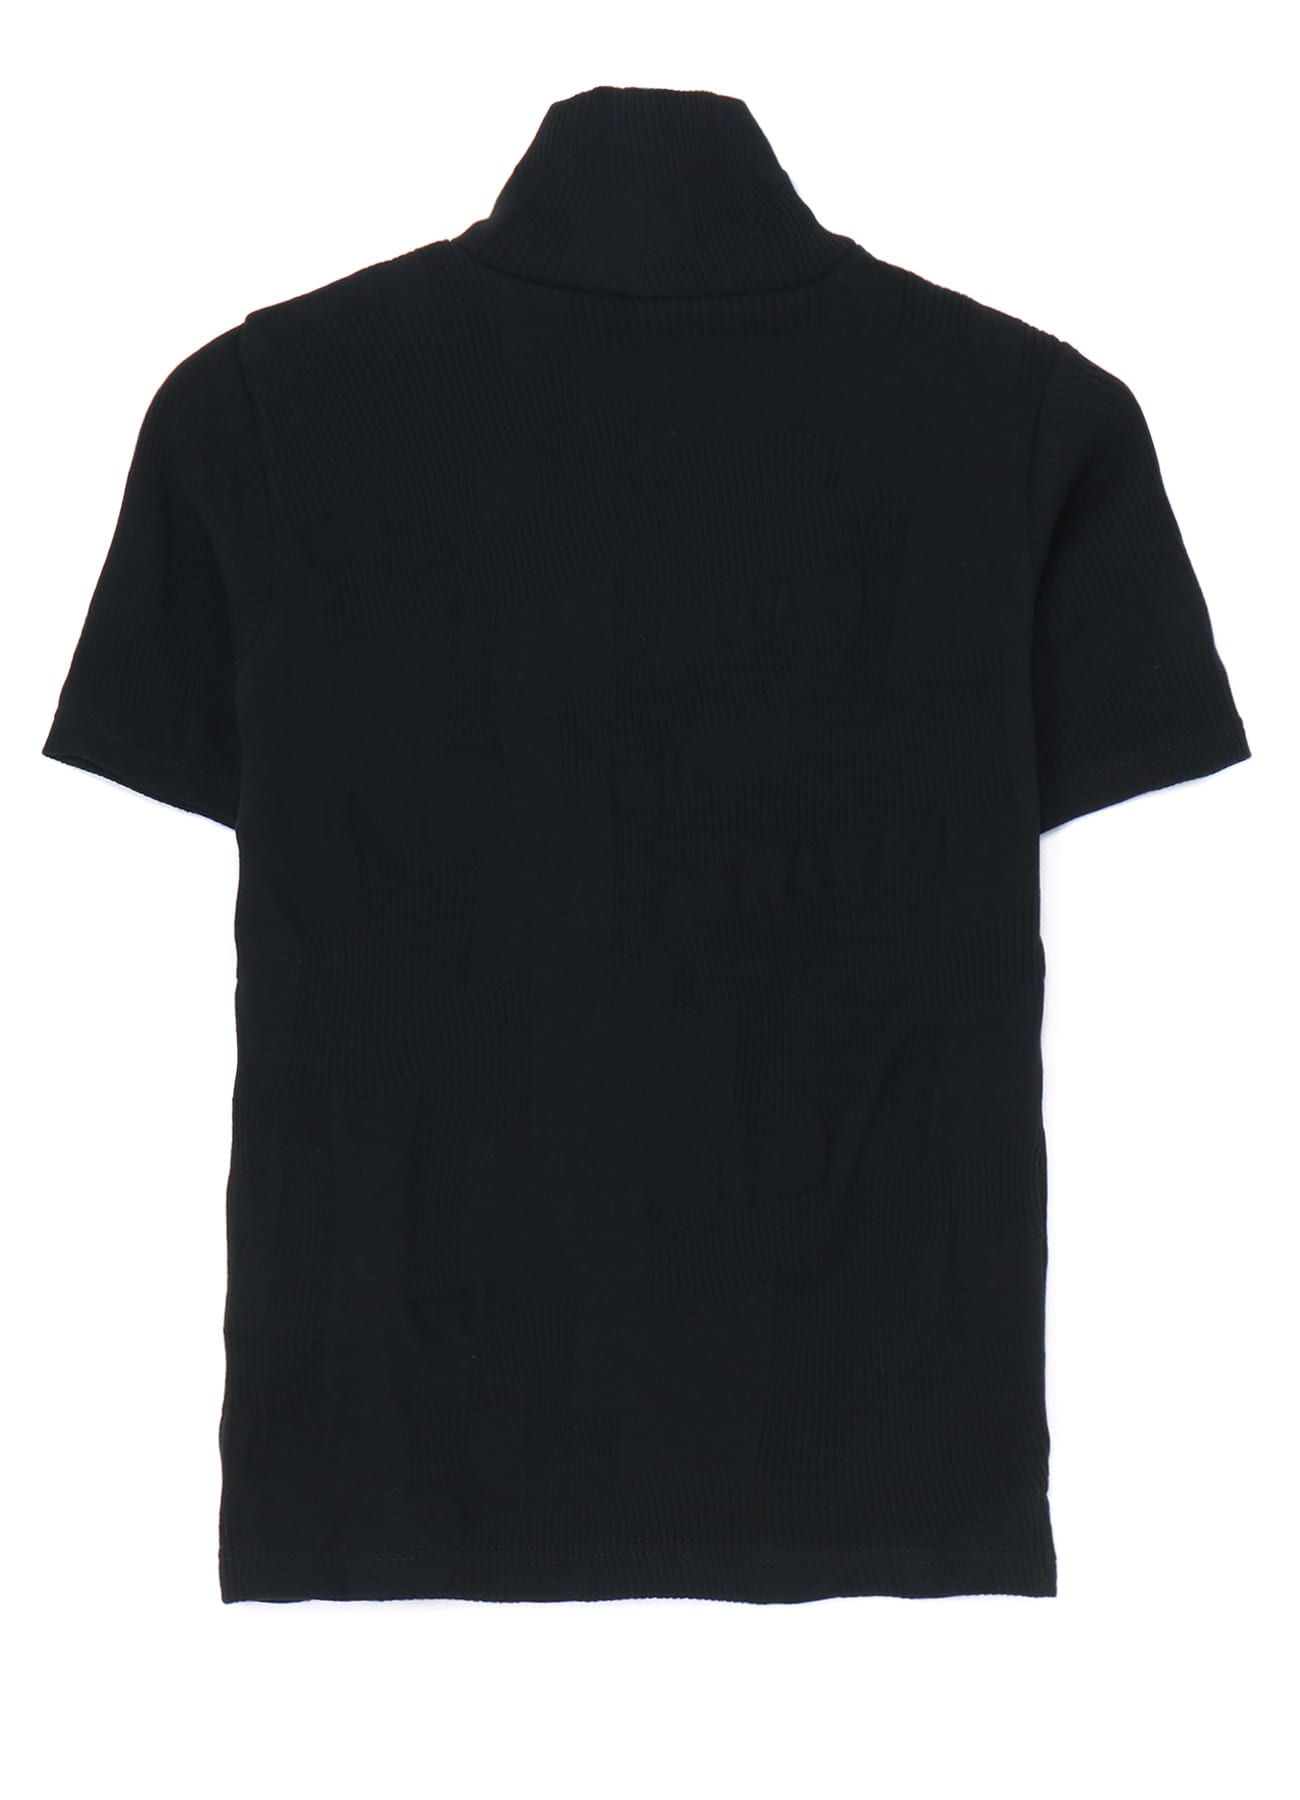 RIBBED BLOCK LINKS HIGH NECK HALF SLEEVE T(S Black): Y's｜THE SHOP 